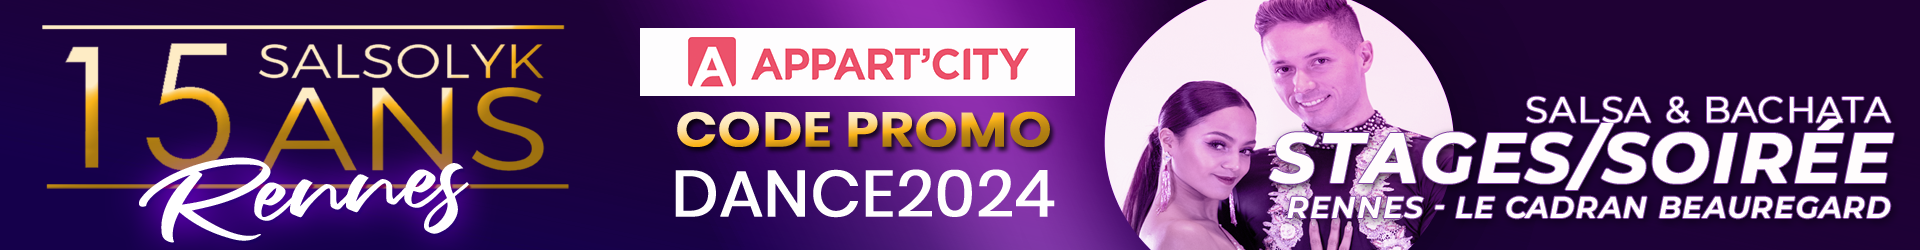 code promo appart city rennes